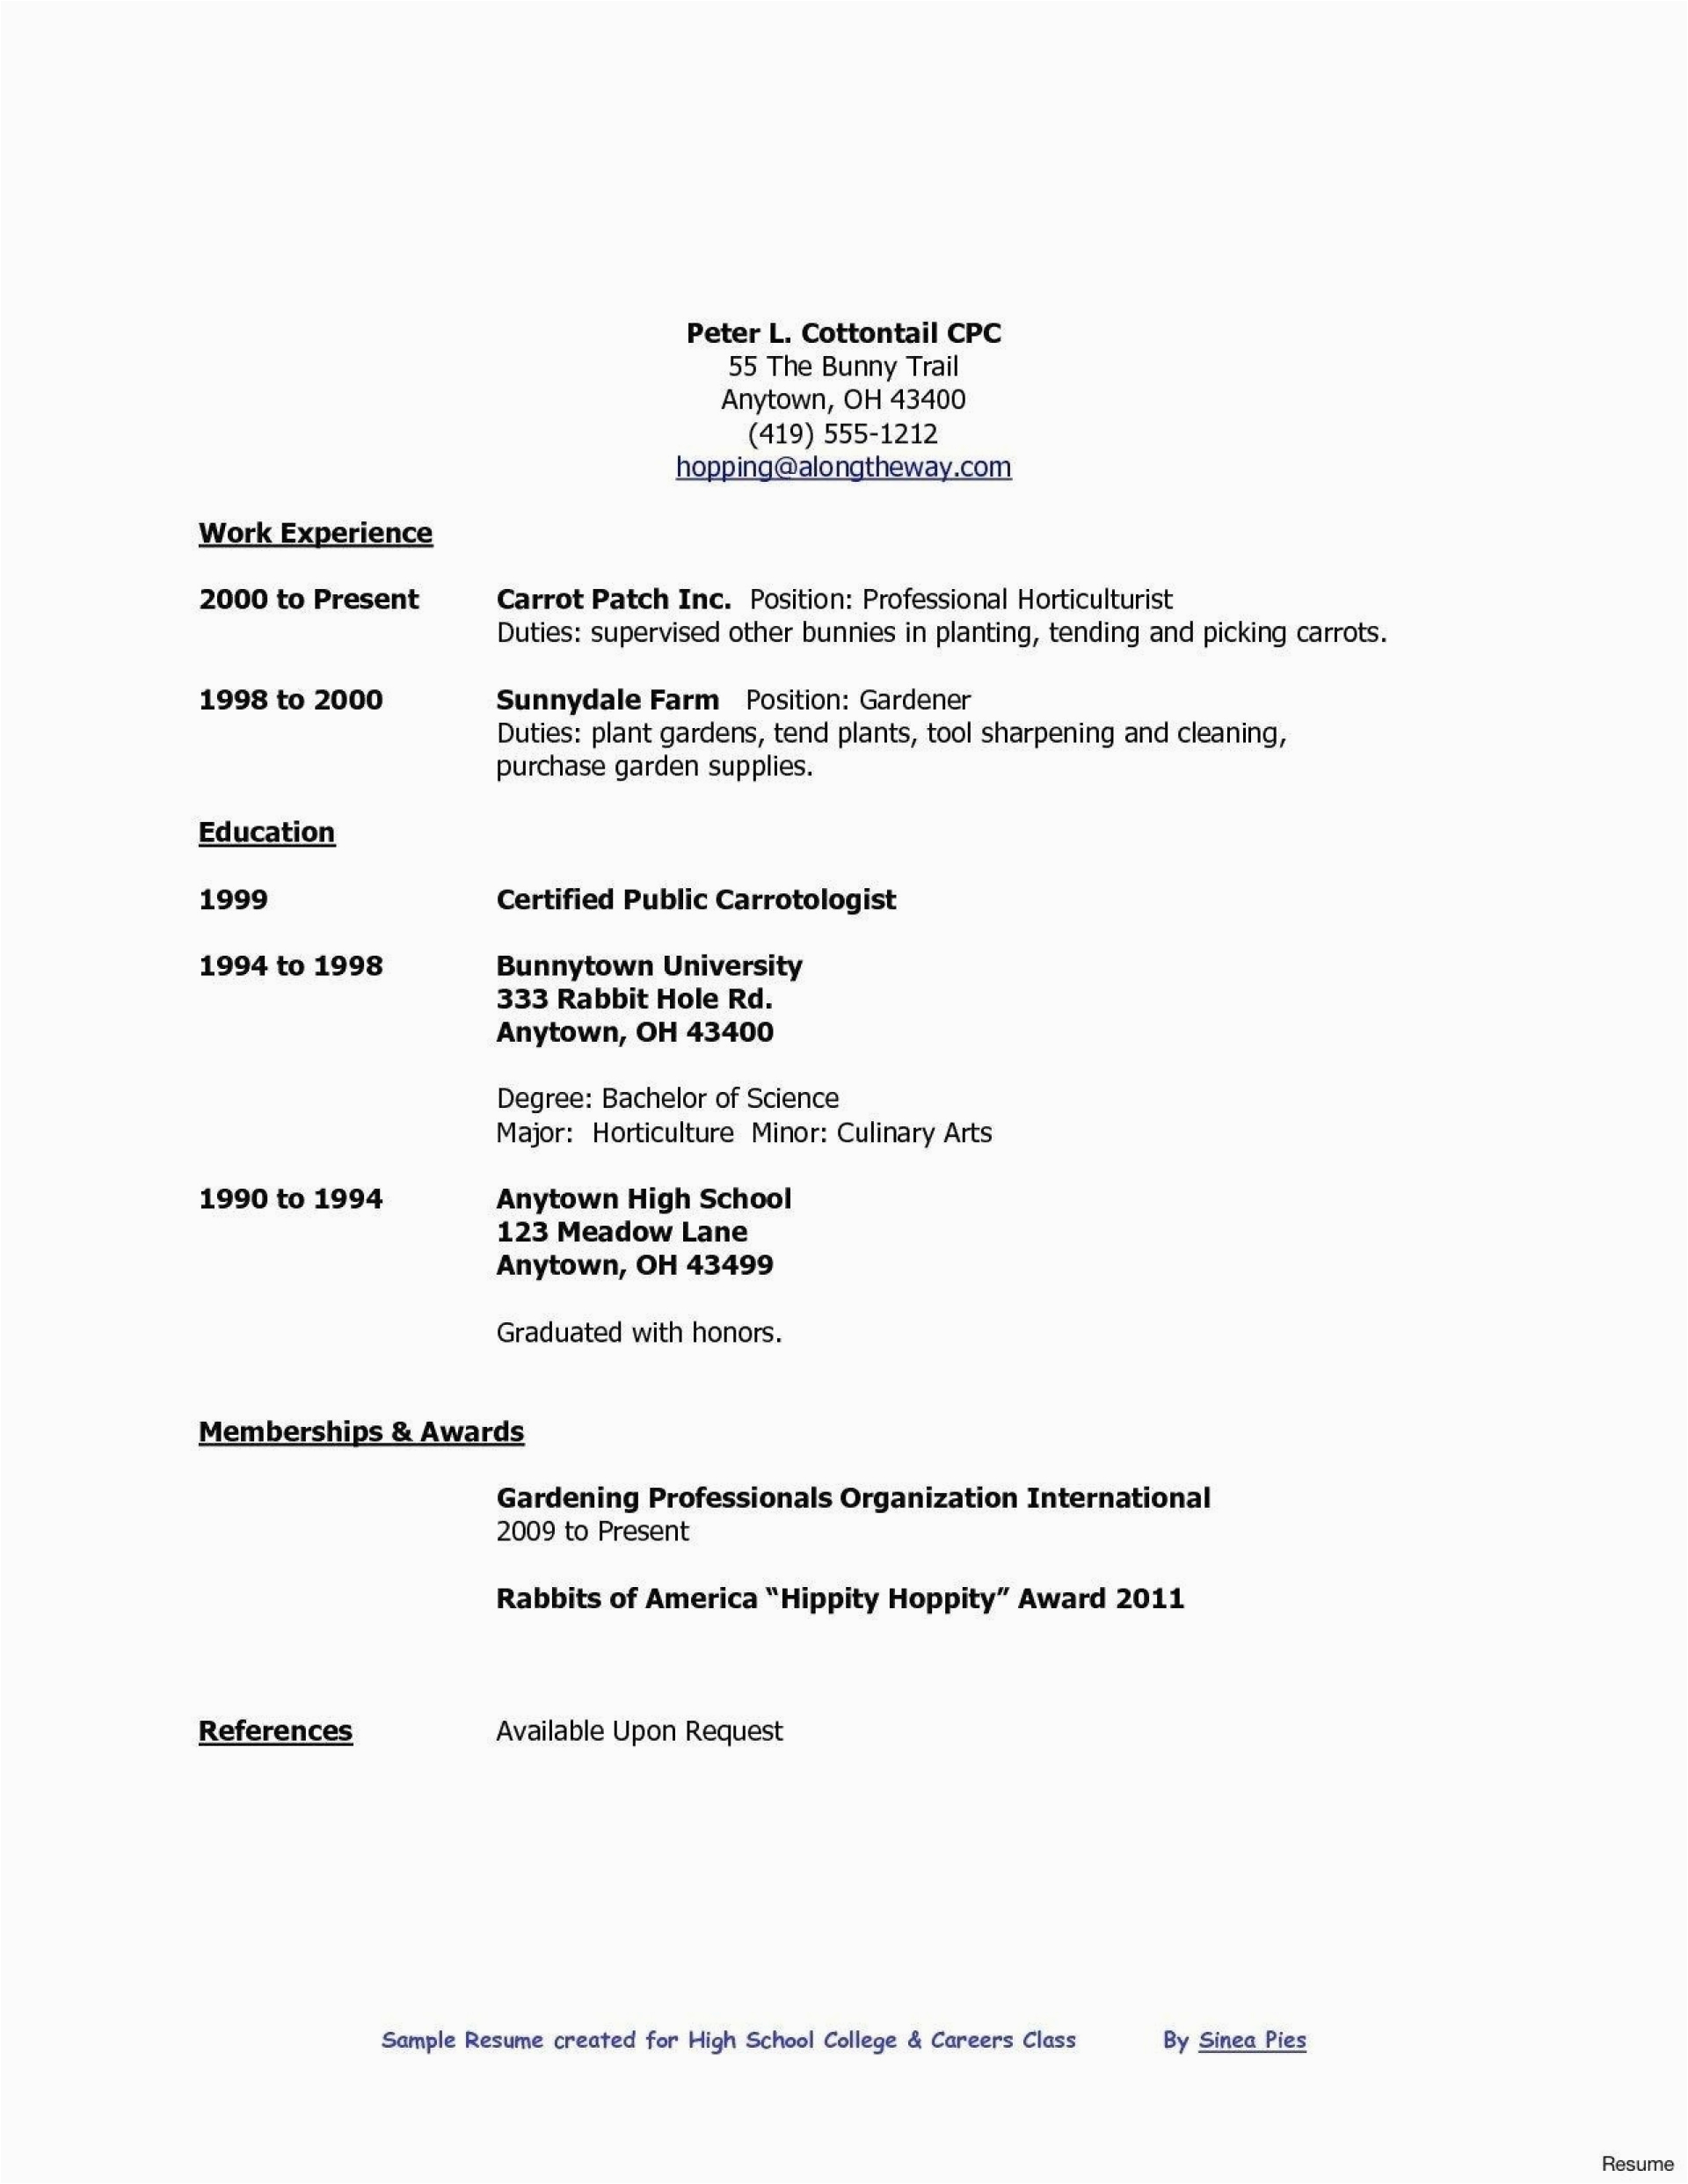 Sample Resume for Highschool Graduate with No Work Experience Grade 10 Teenager High School Student Resume with No Work